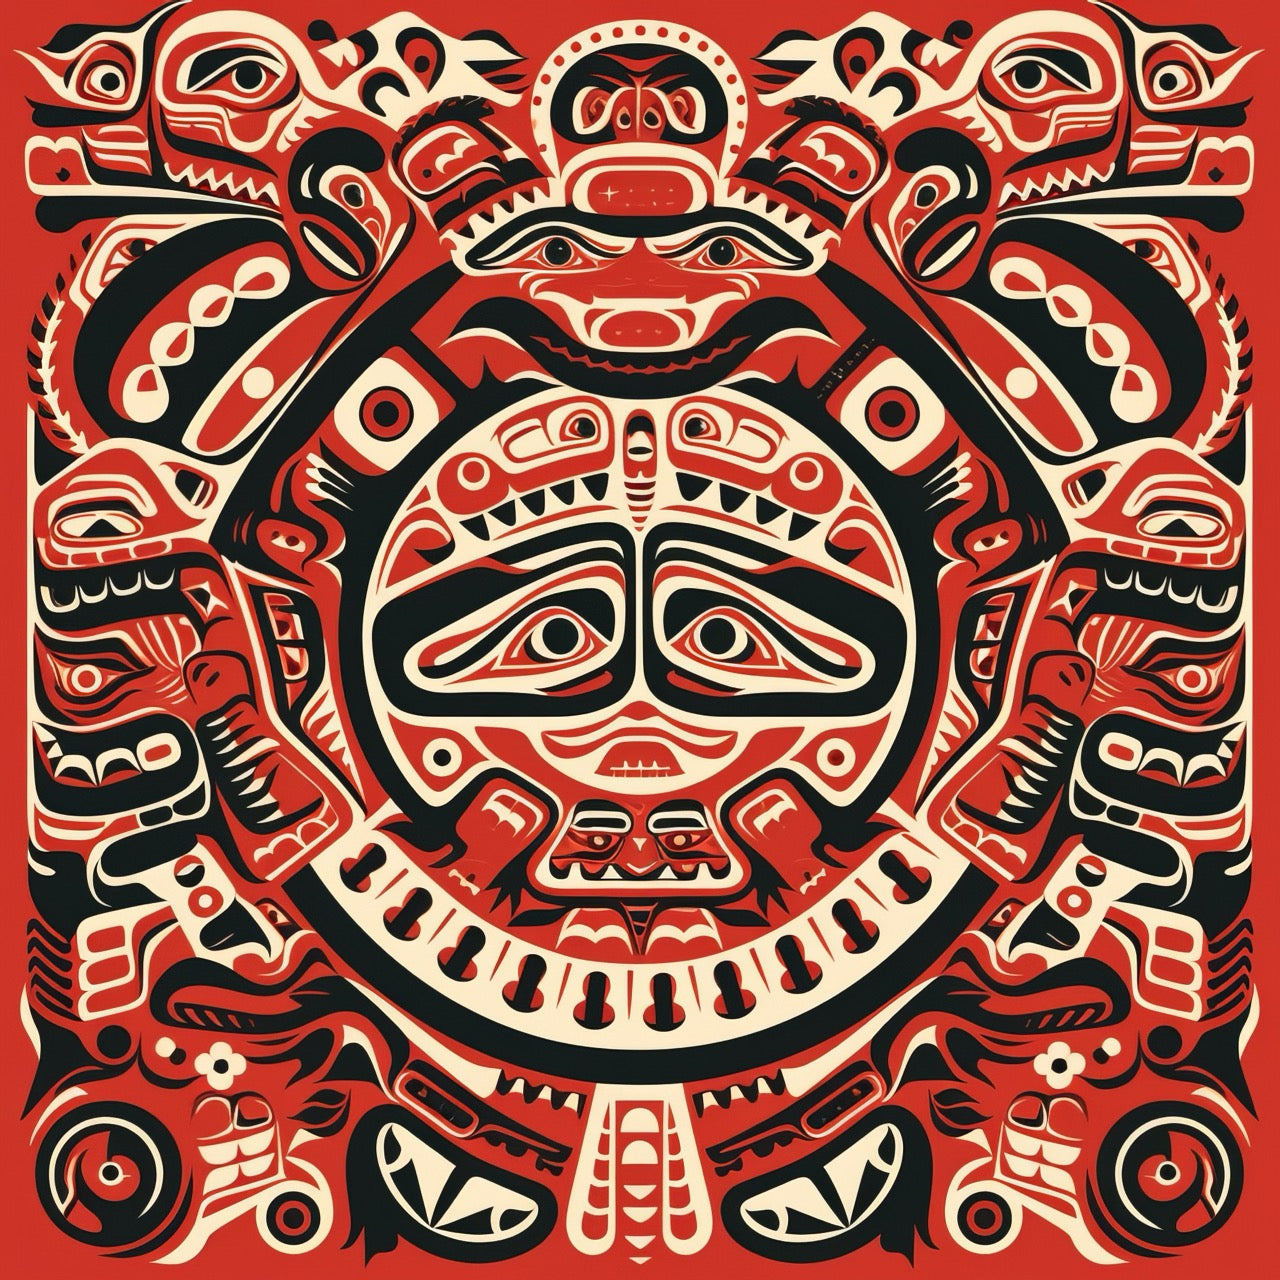 Indigenous & Abstract Decals - Exquisite Art Collection by Lux Label Labs